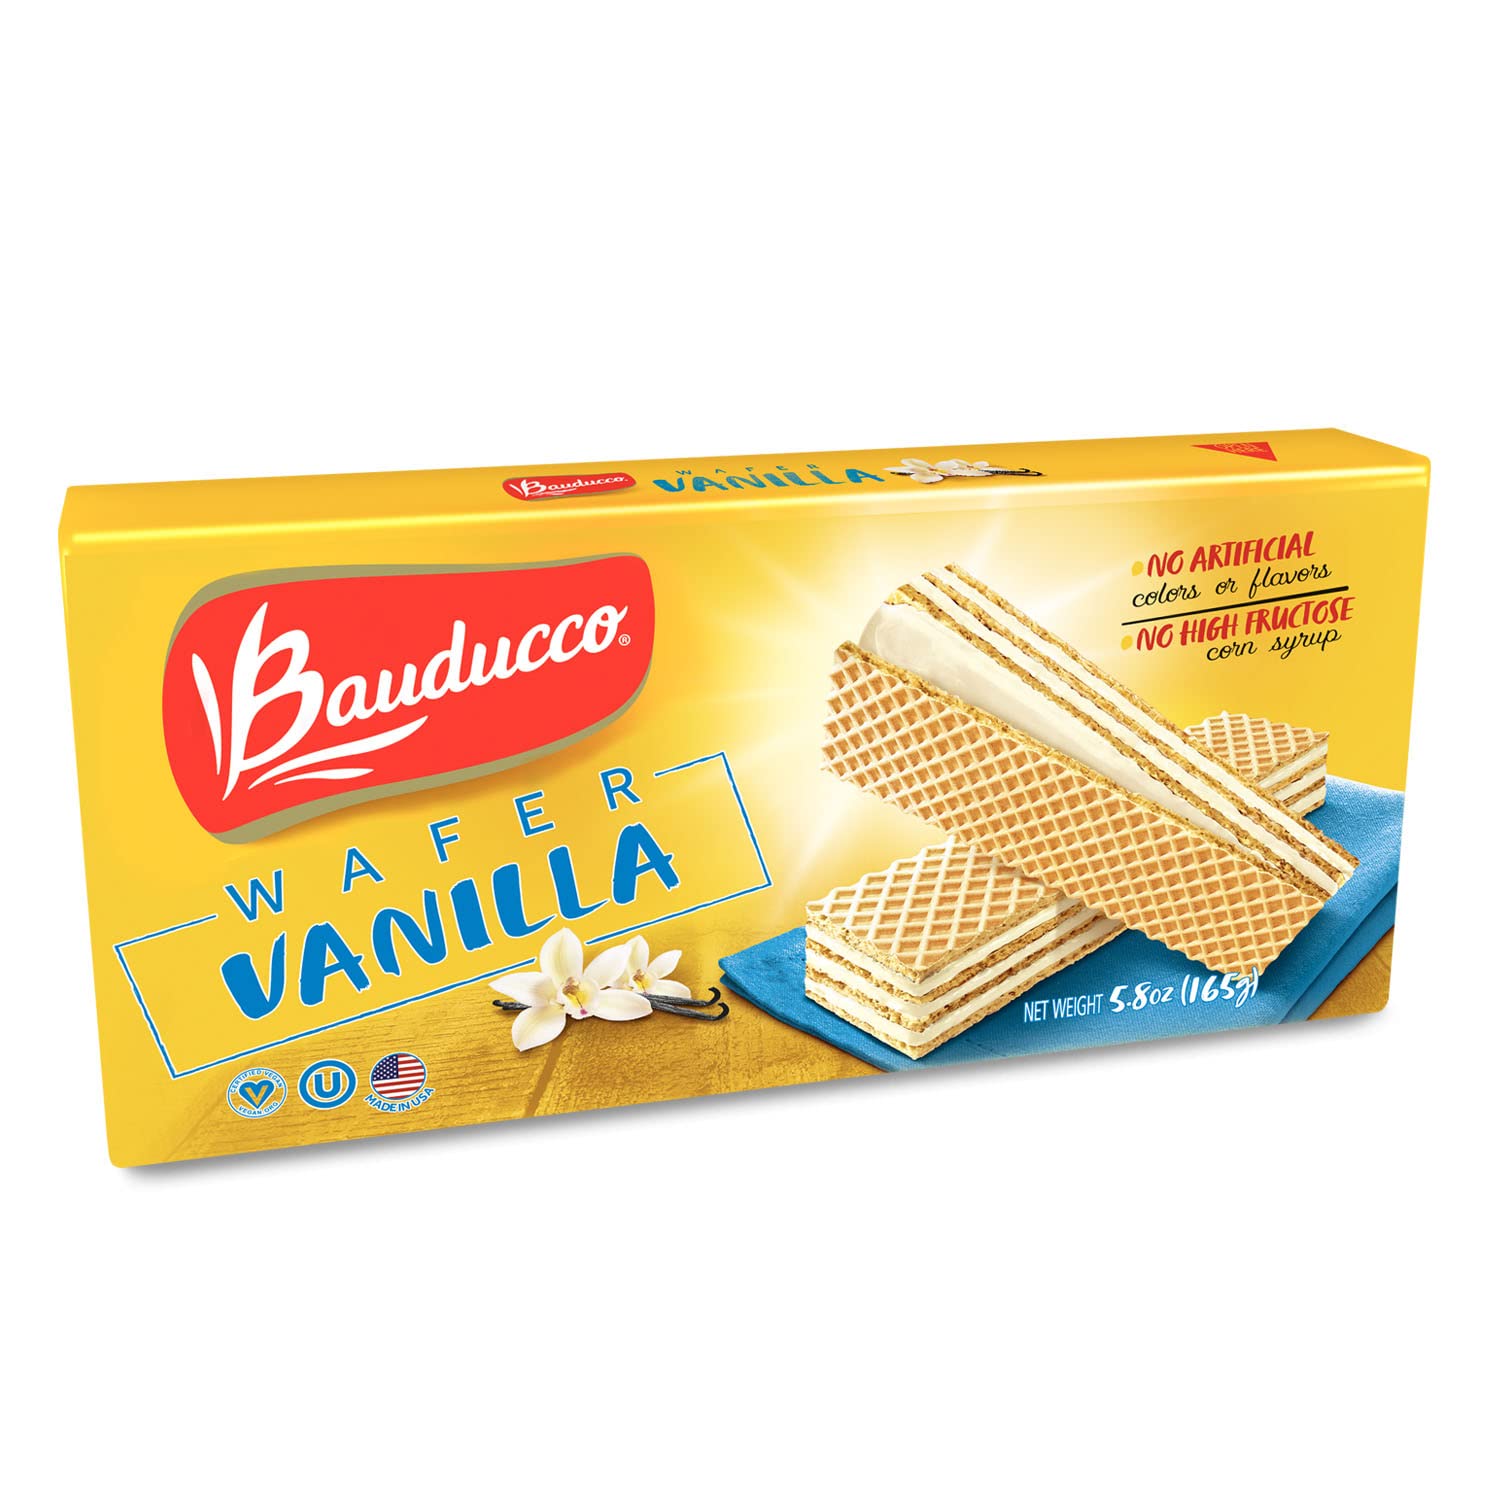 Bauducco Coconut Wafers - Crispy Wafer Cookies With 3 Delicious, Indulgent Decadent Layers of Coconut Flavored Cream - Delicious Sweet Snack or Desert - 5.82oz (Pack of 1)